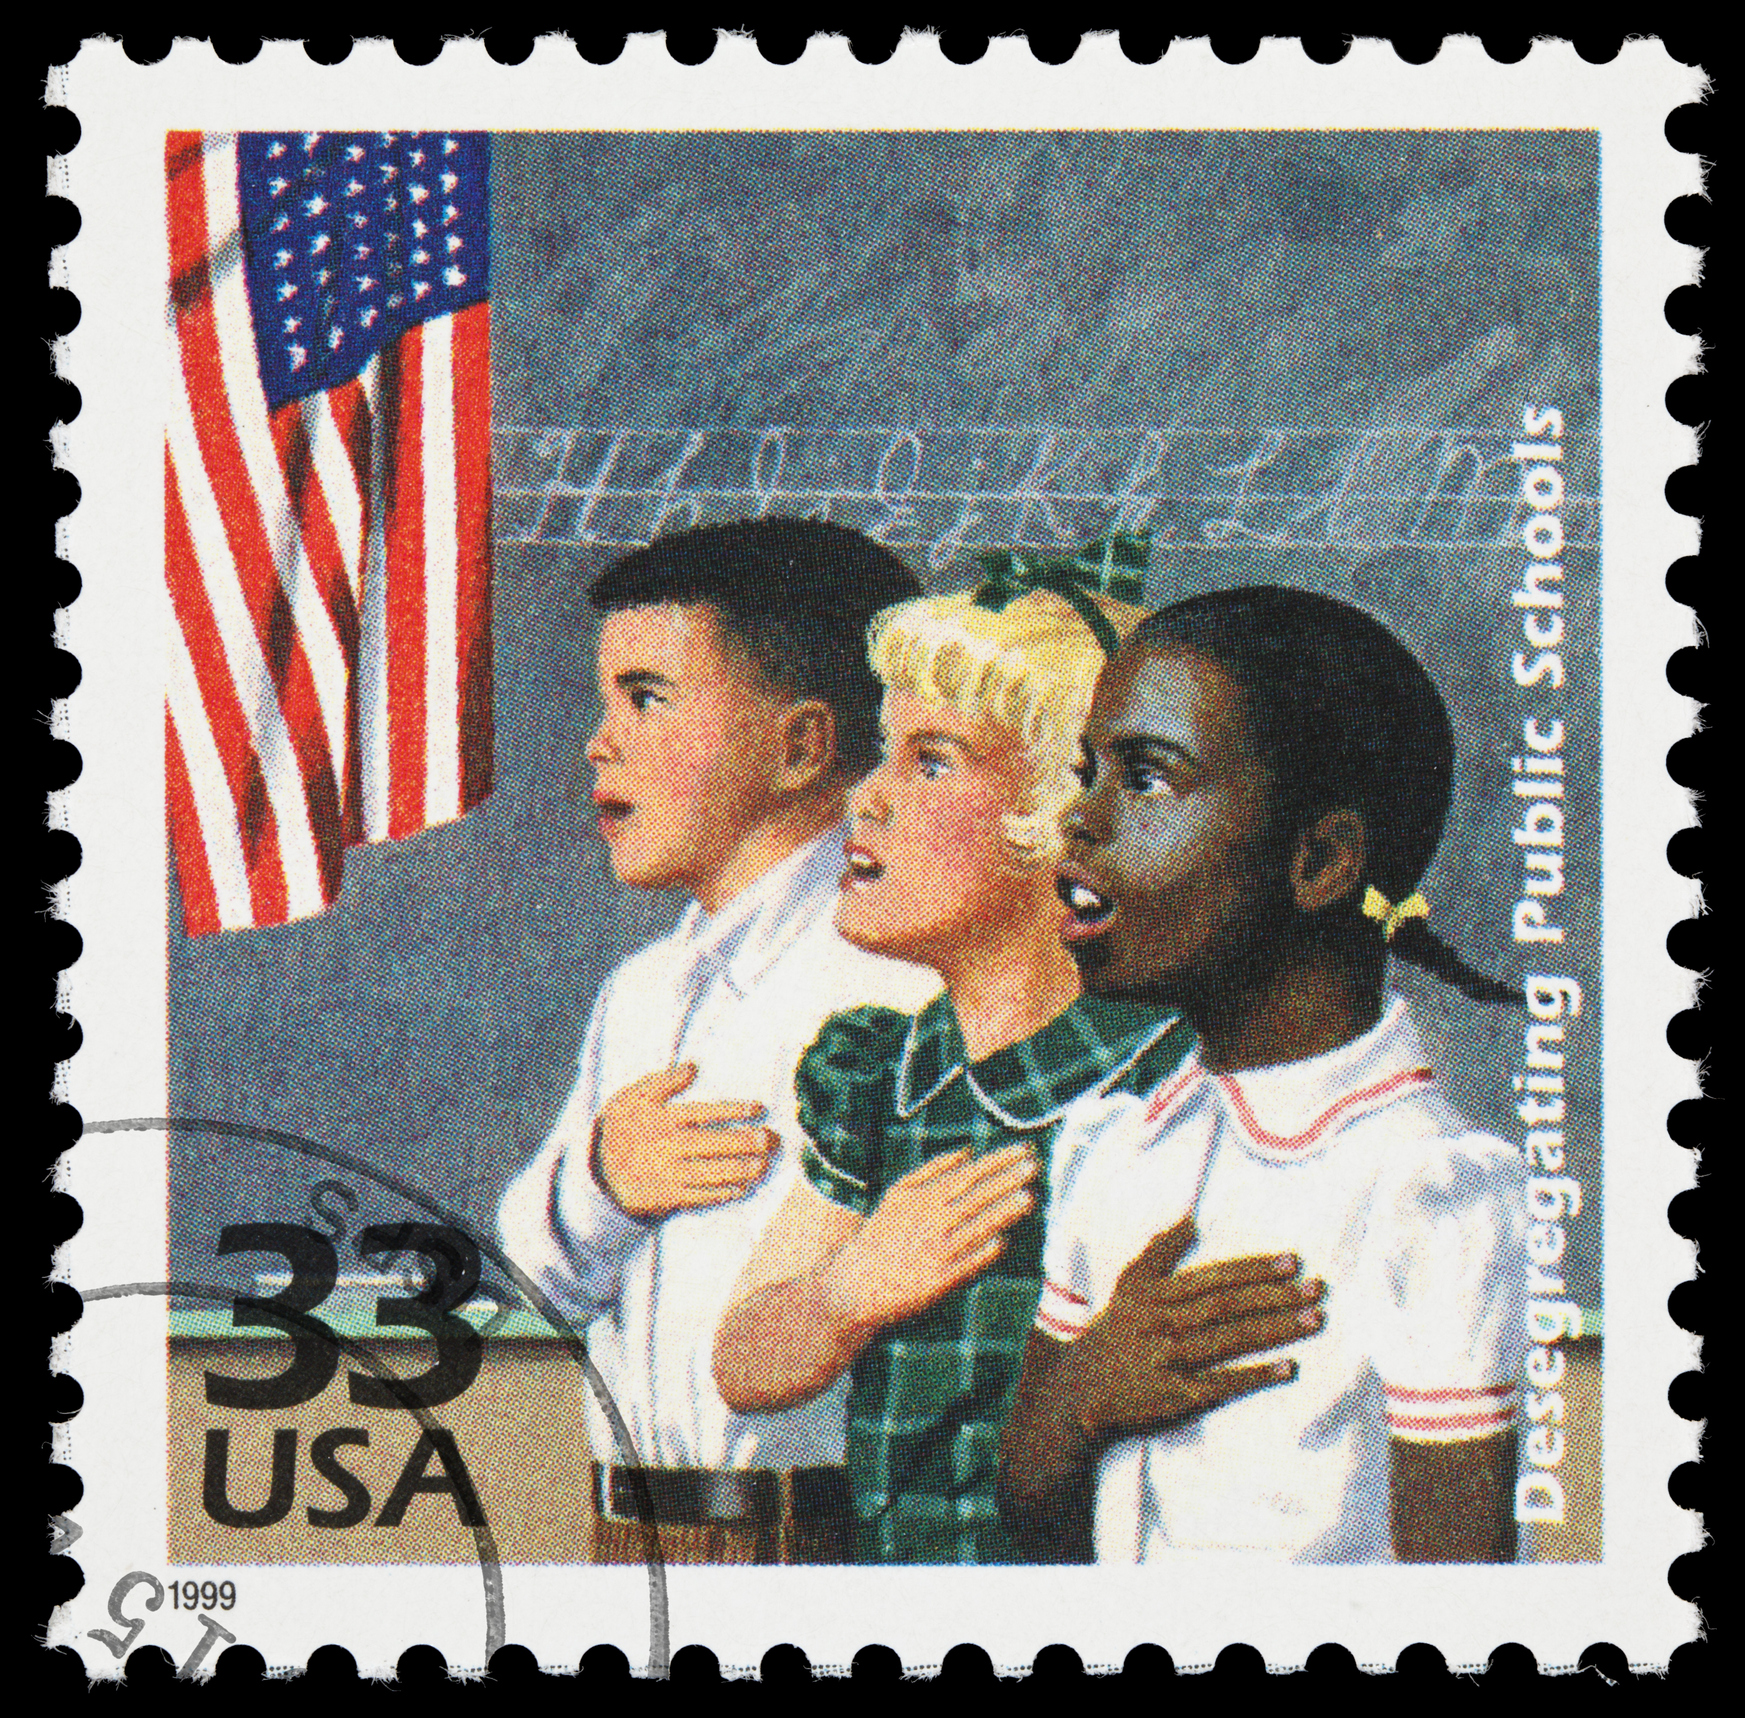 A stamp with elementary students of different races commemorating school desegregation.